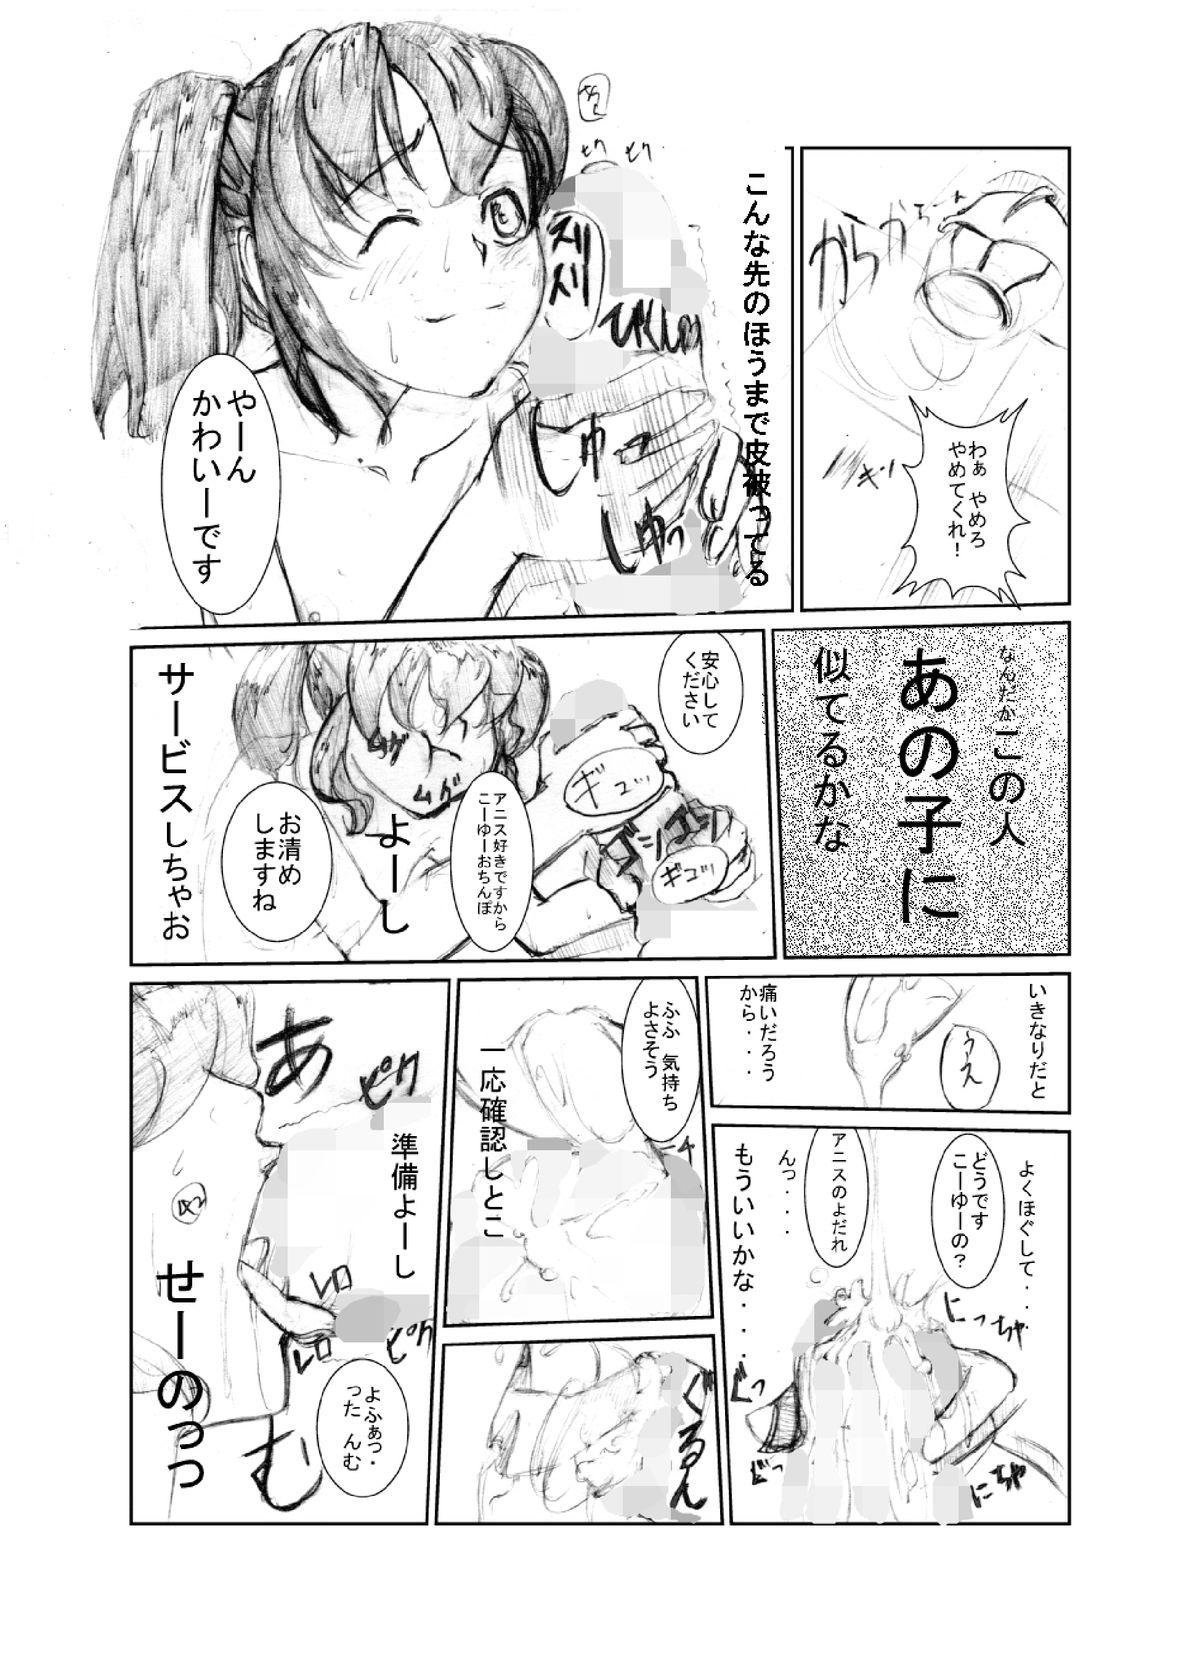 Africa 虹は溶けゆく 朝焼けに - Tales of the abyss Gay Spank - Page 11